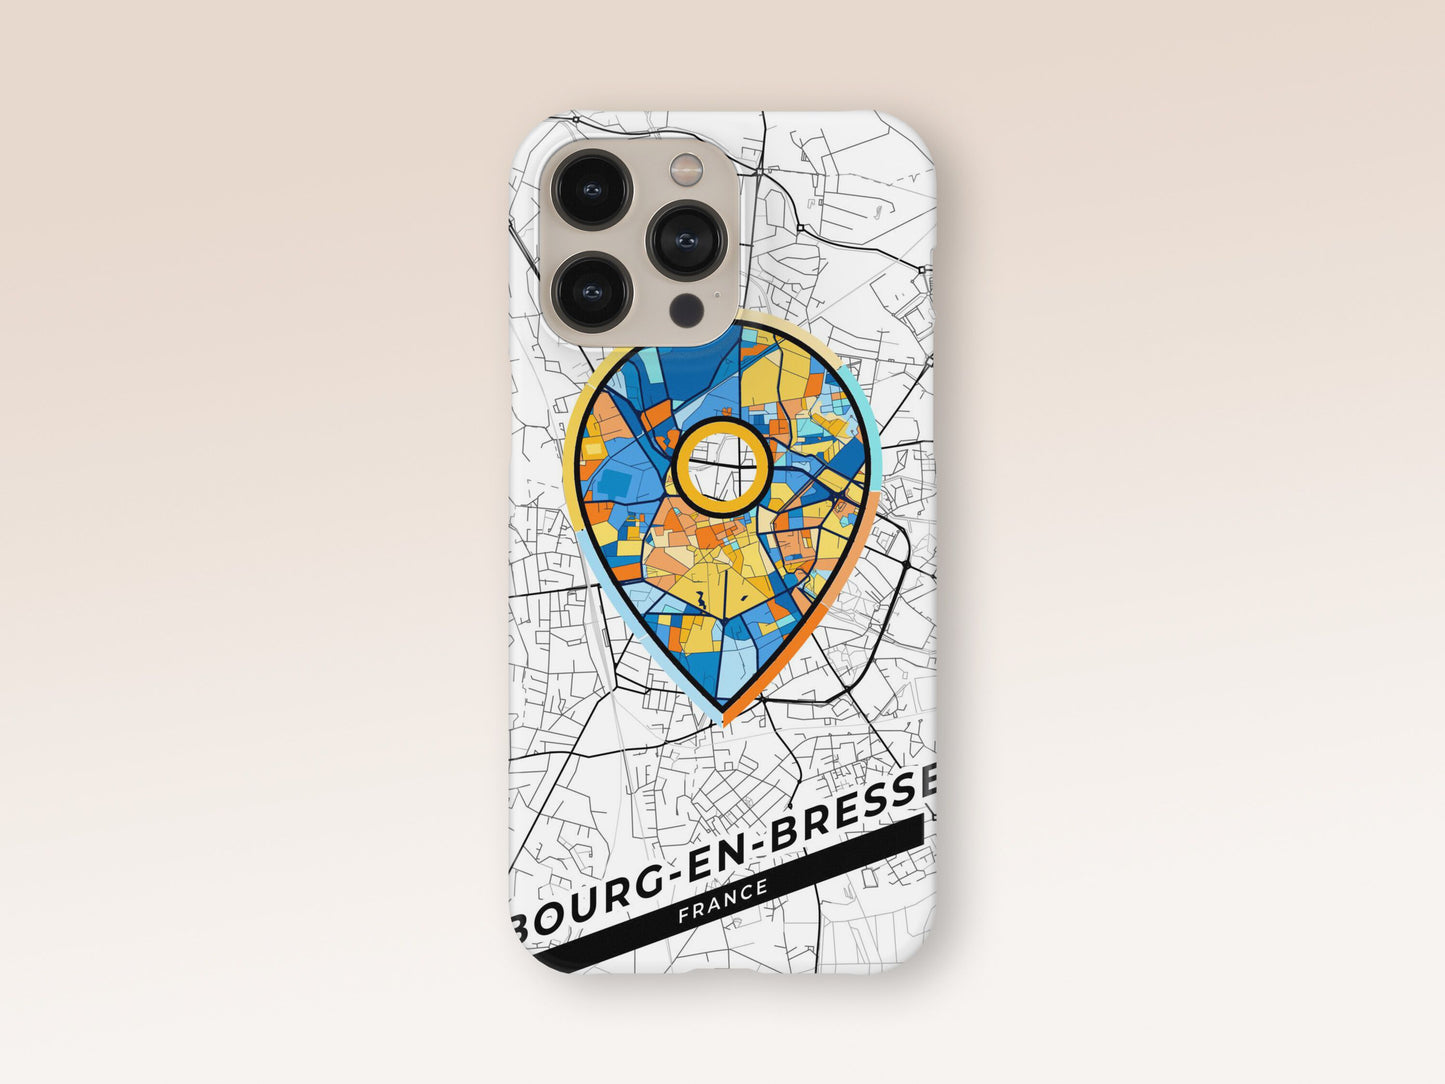 Bourg-En-Bresse France slim phone case with colorful icon. Birthday, wedding or housewarming gift. Couple match cases. 1